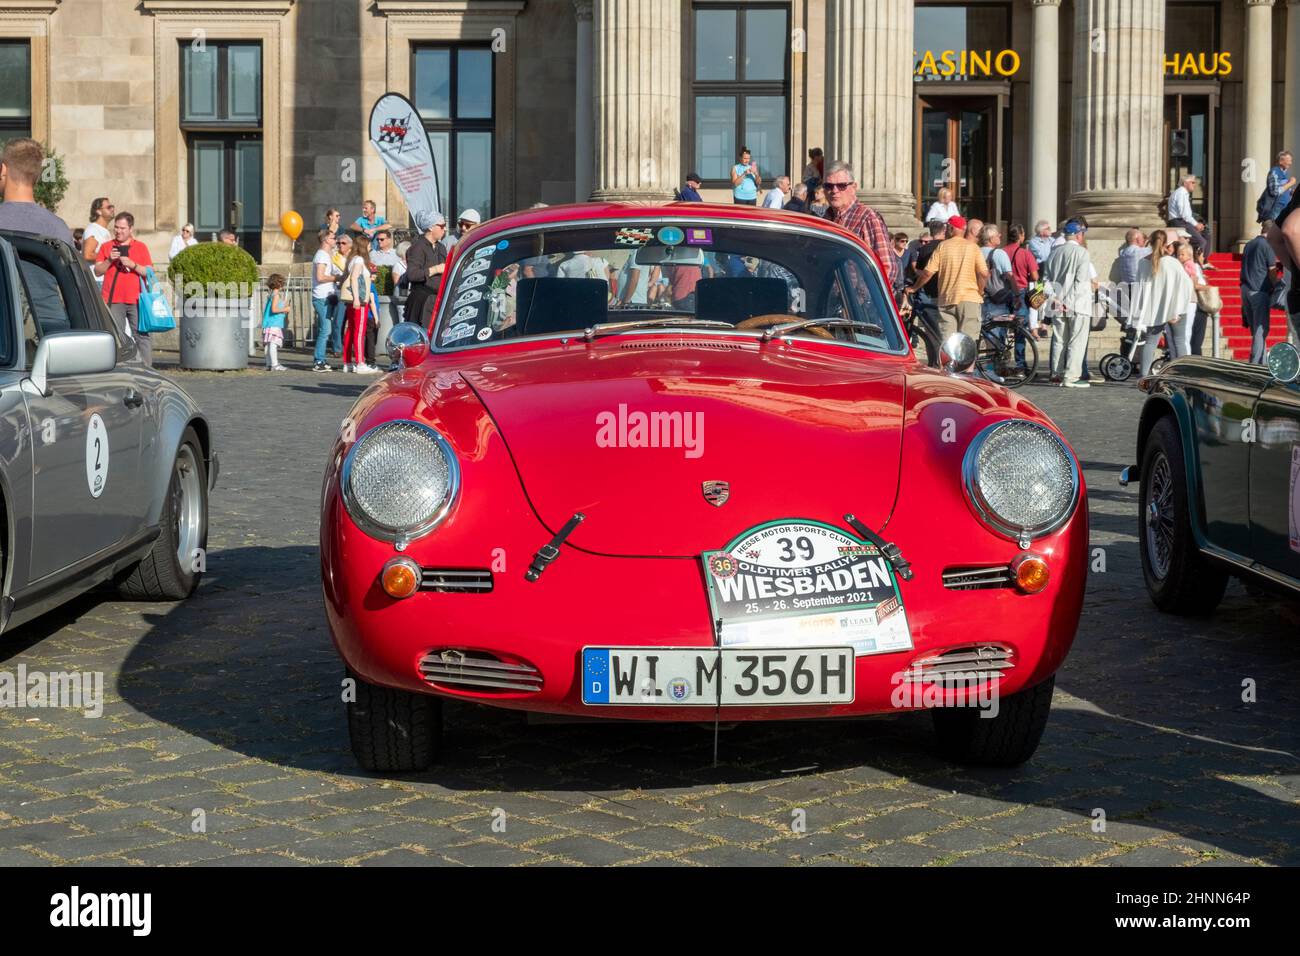 the Porsche 356 SC 1600 reaches the final goal  of the Oldtimer ralley Wiesbaden in Wiesbaden after a challenge in the Rheingau, Germany. Stock Photo